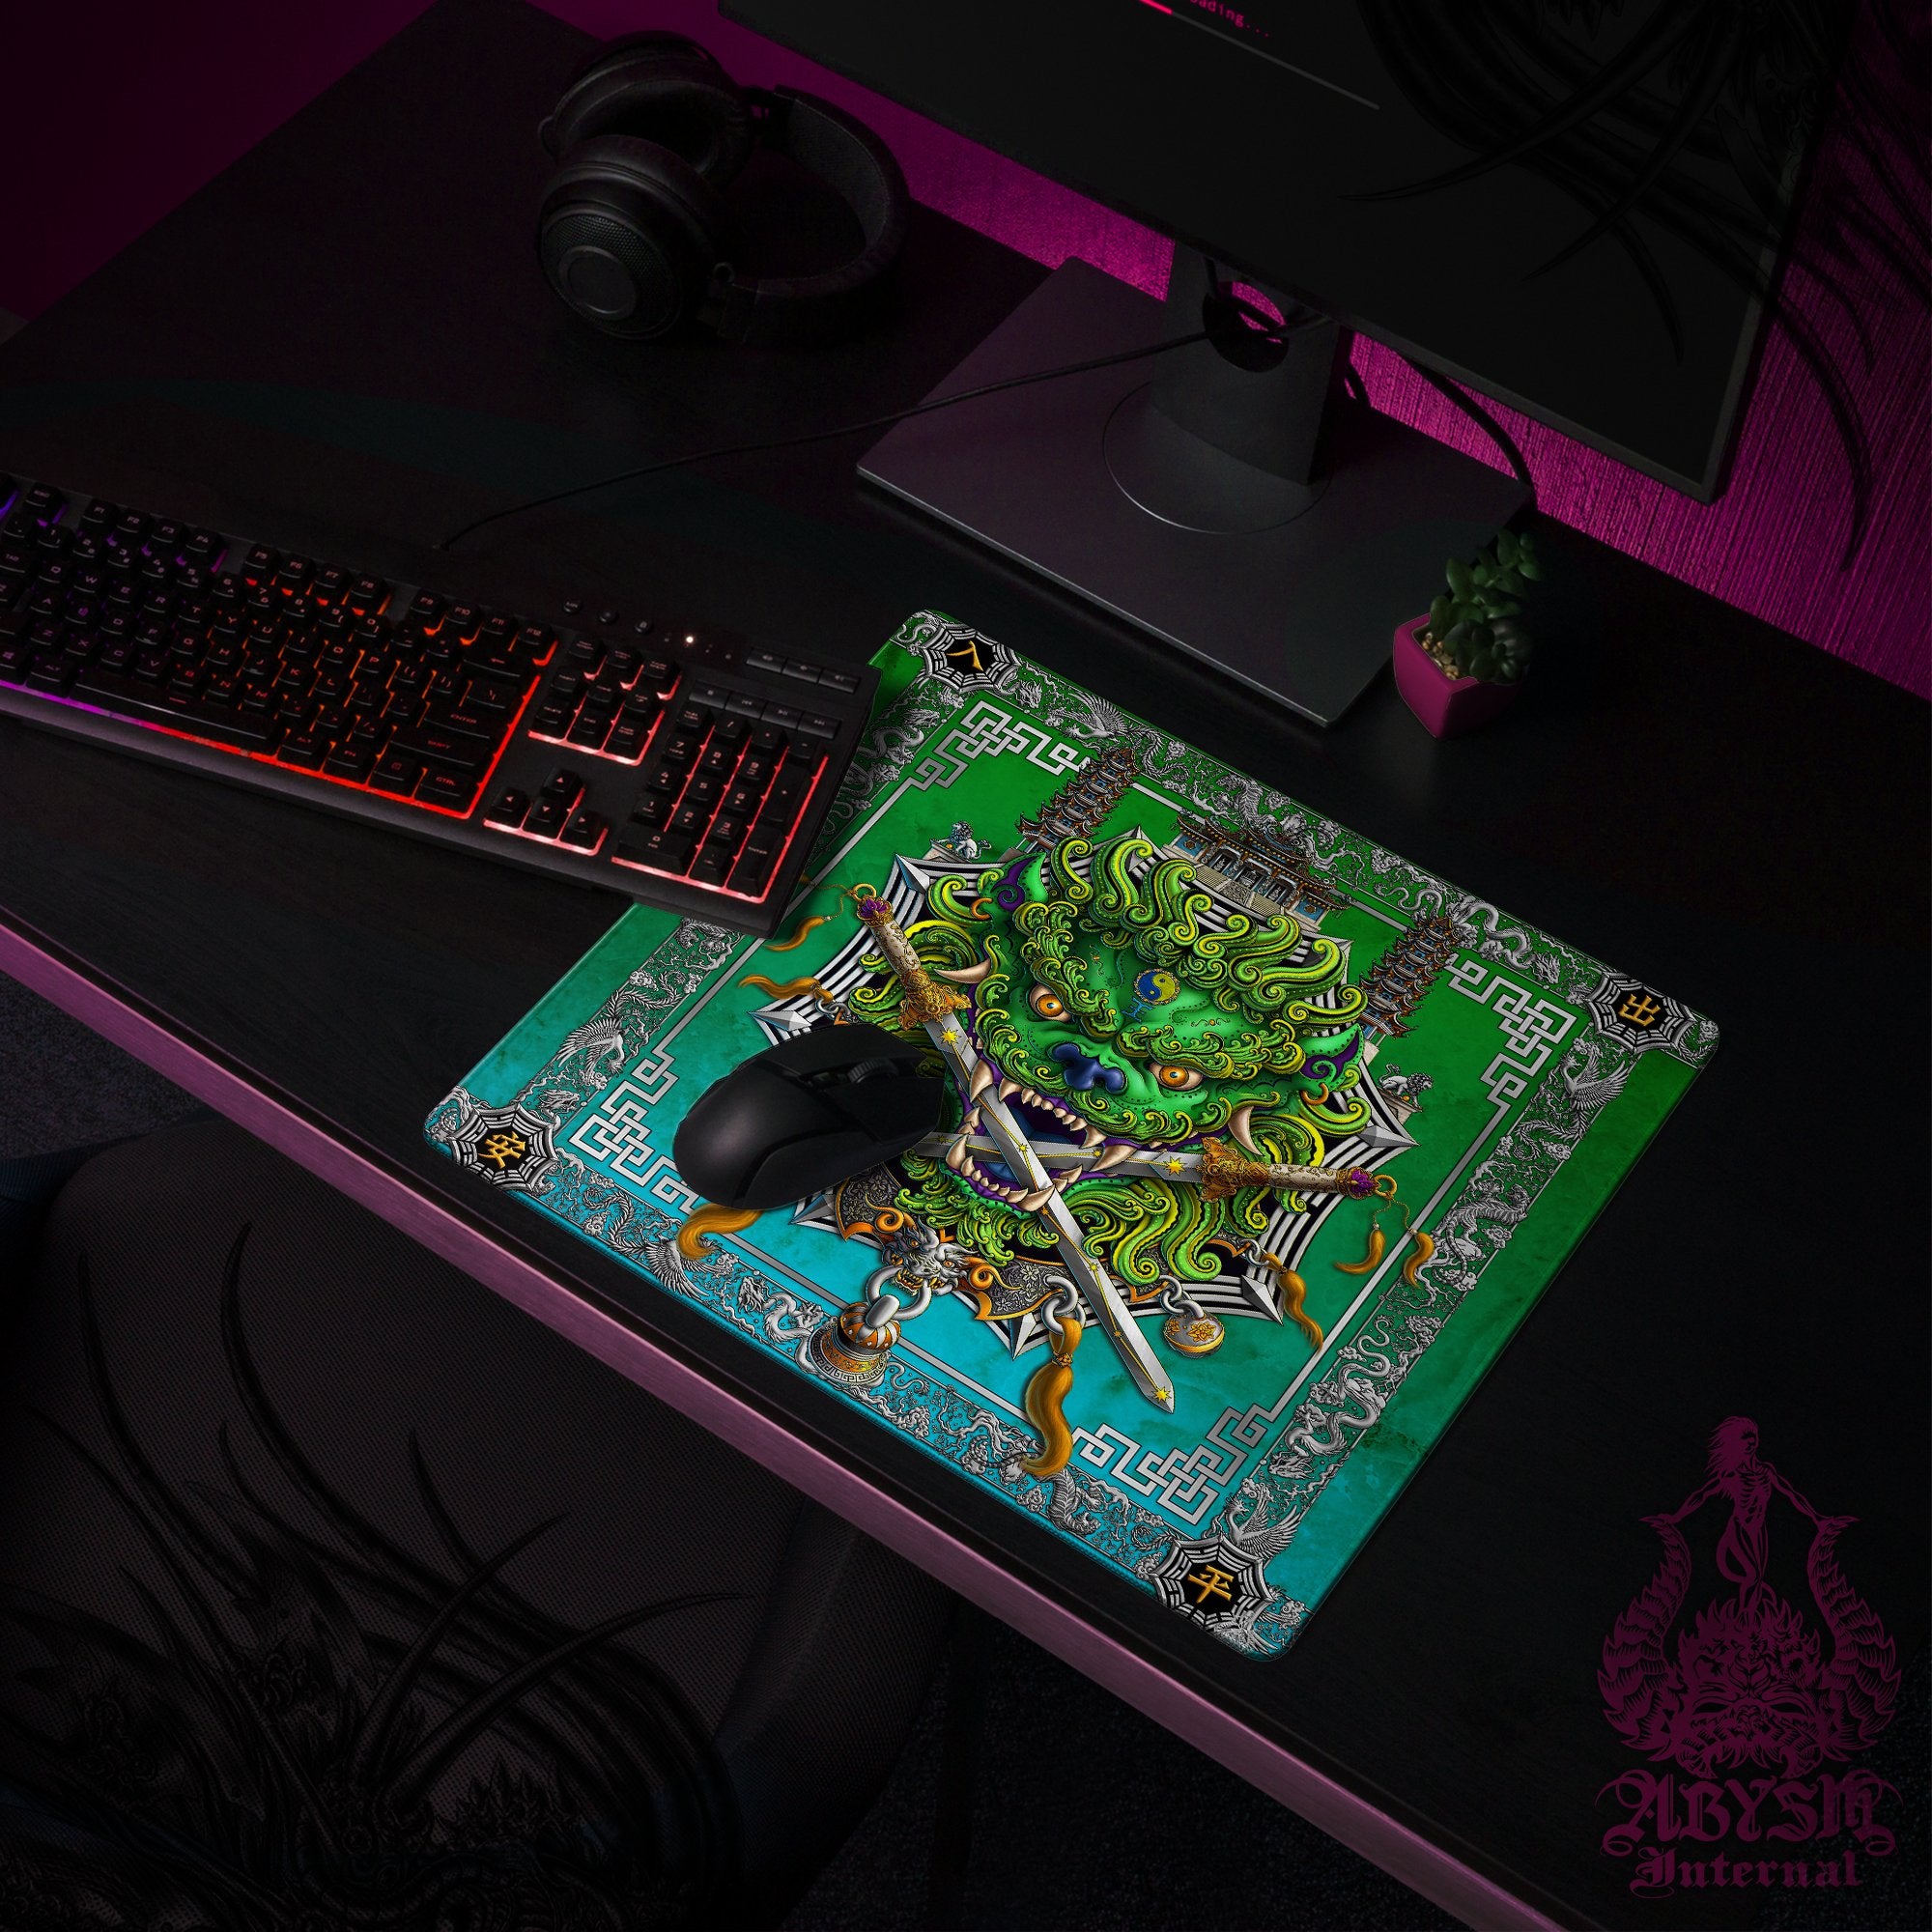 Lion Desk Mat, Asian Gaming Mouse Pad, Taiwan Table Protector Cover, Chinese Workpad, Fantasy Art Print - Green - Abysm Internal